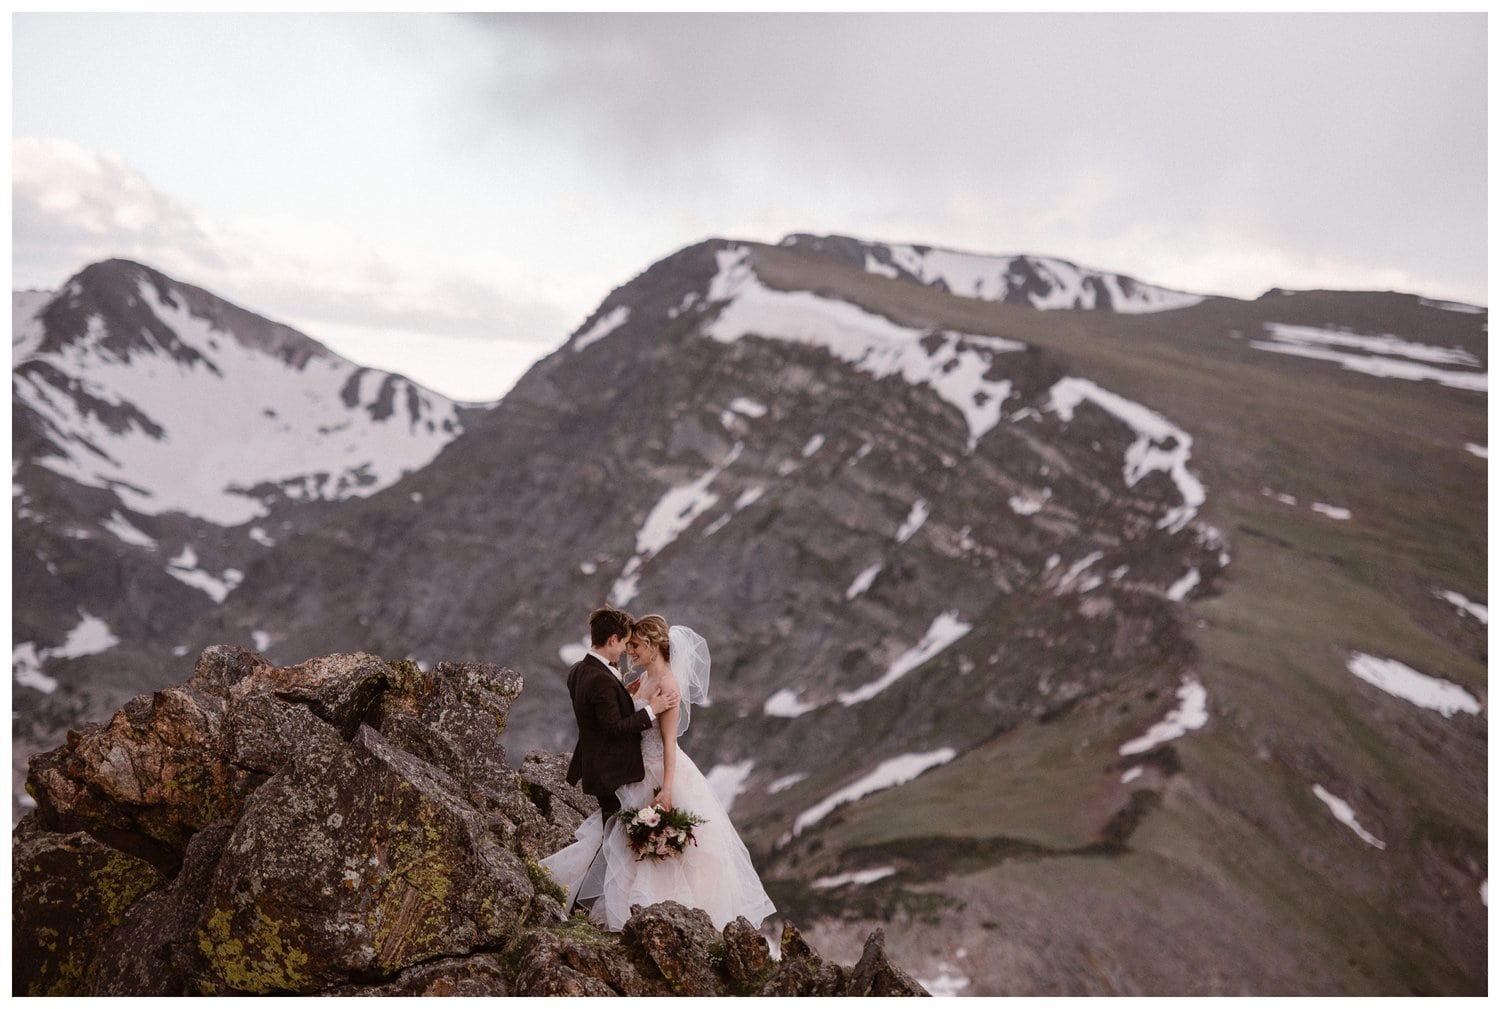 Two brides embrace on a cliff at Trail Ridge Road in Rocky Mountain National Park, Colorado.